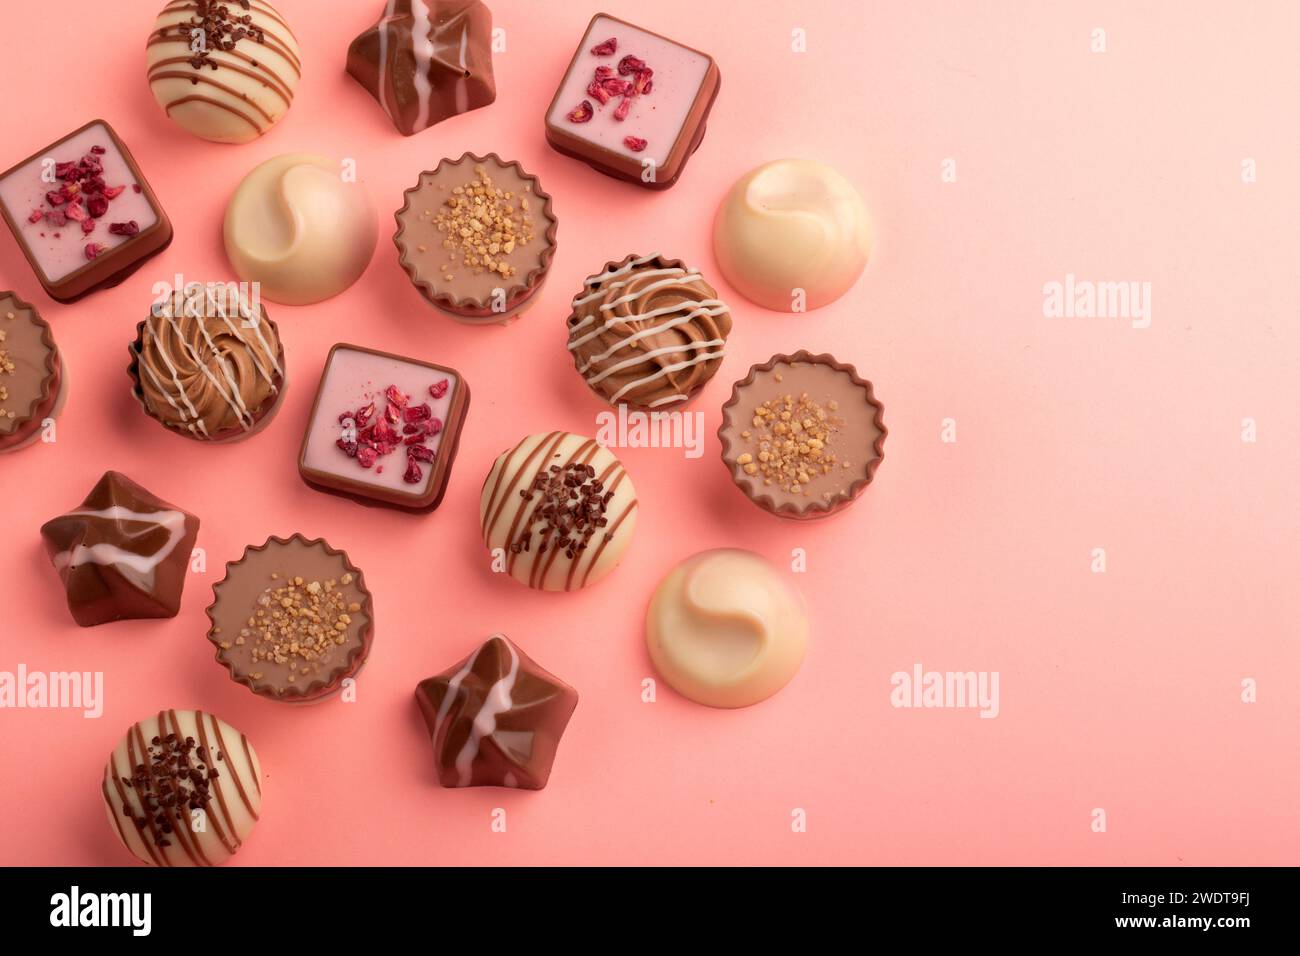 candy, chocolate, food, snack, dark, chocolate truffle, unhealthy eating, truffle, background, sweet, sugar, cocoa, dessert, tasty, closeup, confection Stock Photo